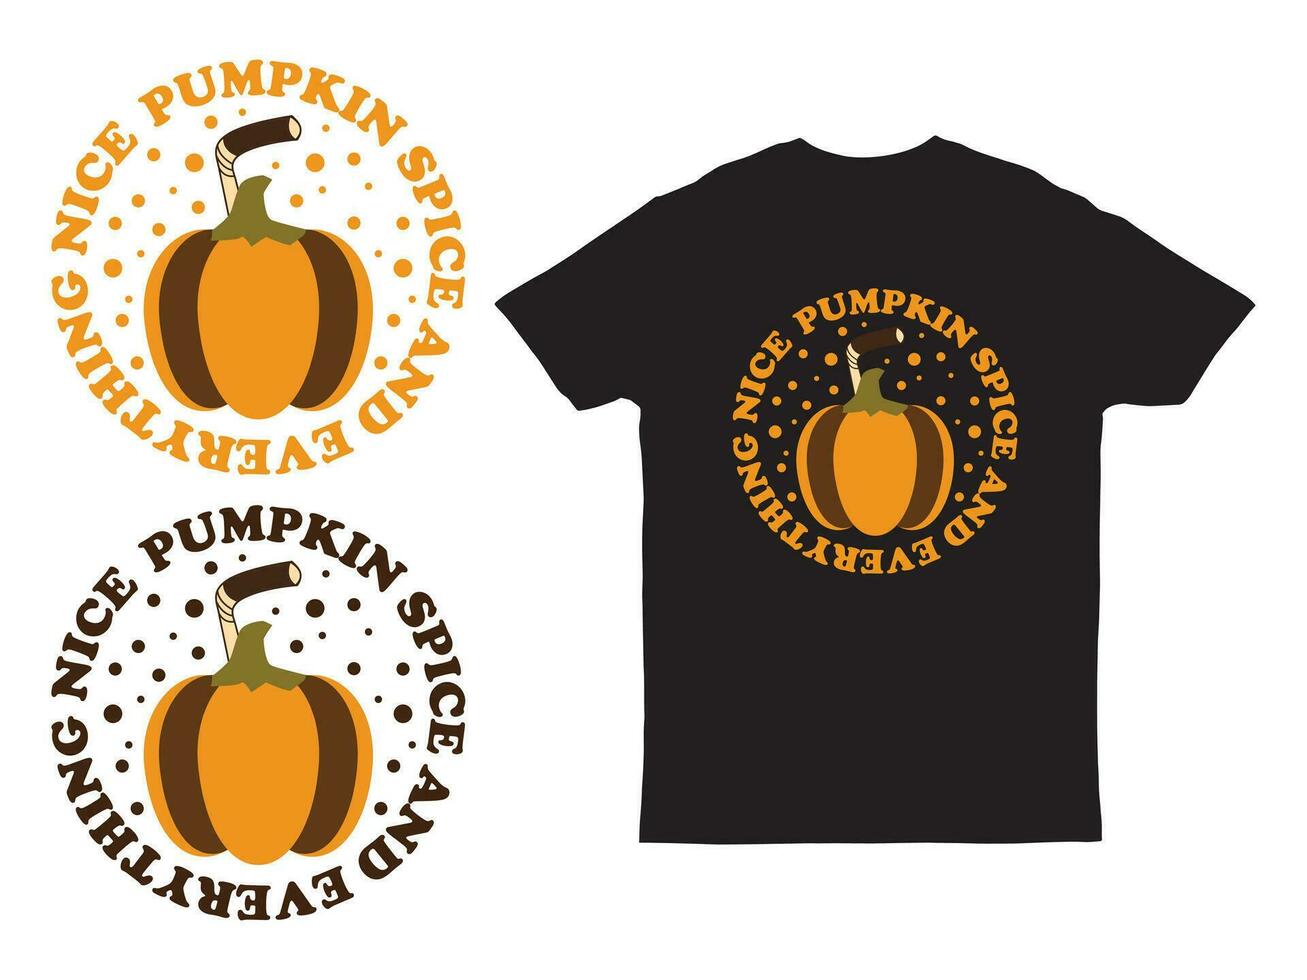 Pumpkin spice and everything nice typography Autumn t-shirt design also Good for restaurants, bar, posters, greeting cards, banners, textiles, gifts, shirts, mugs. vector